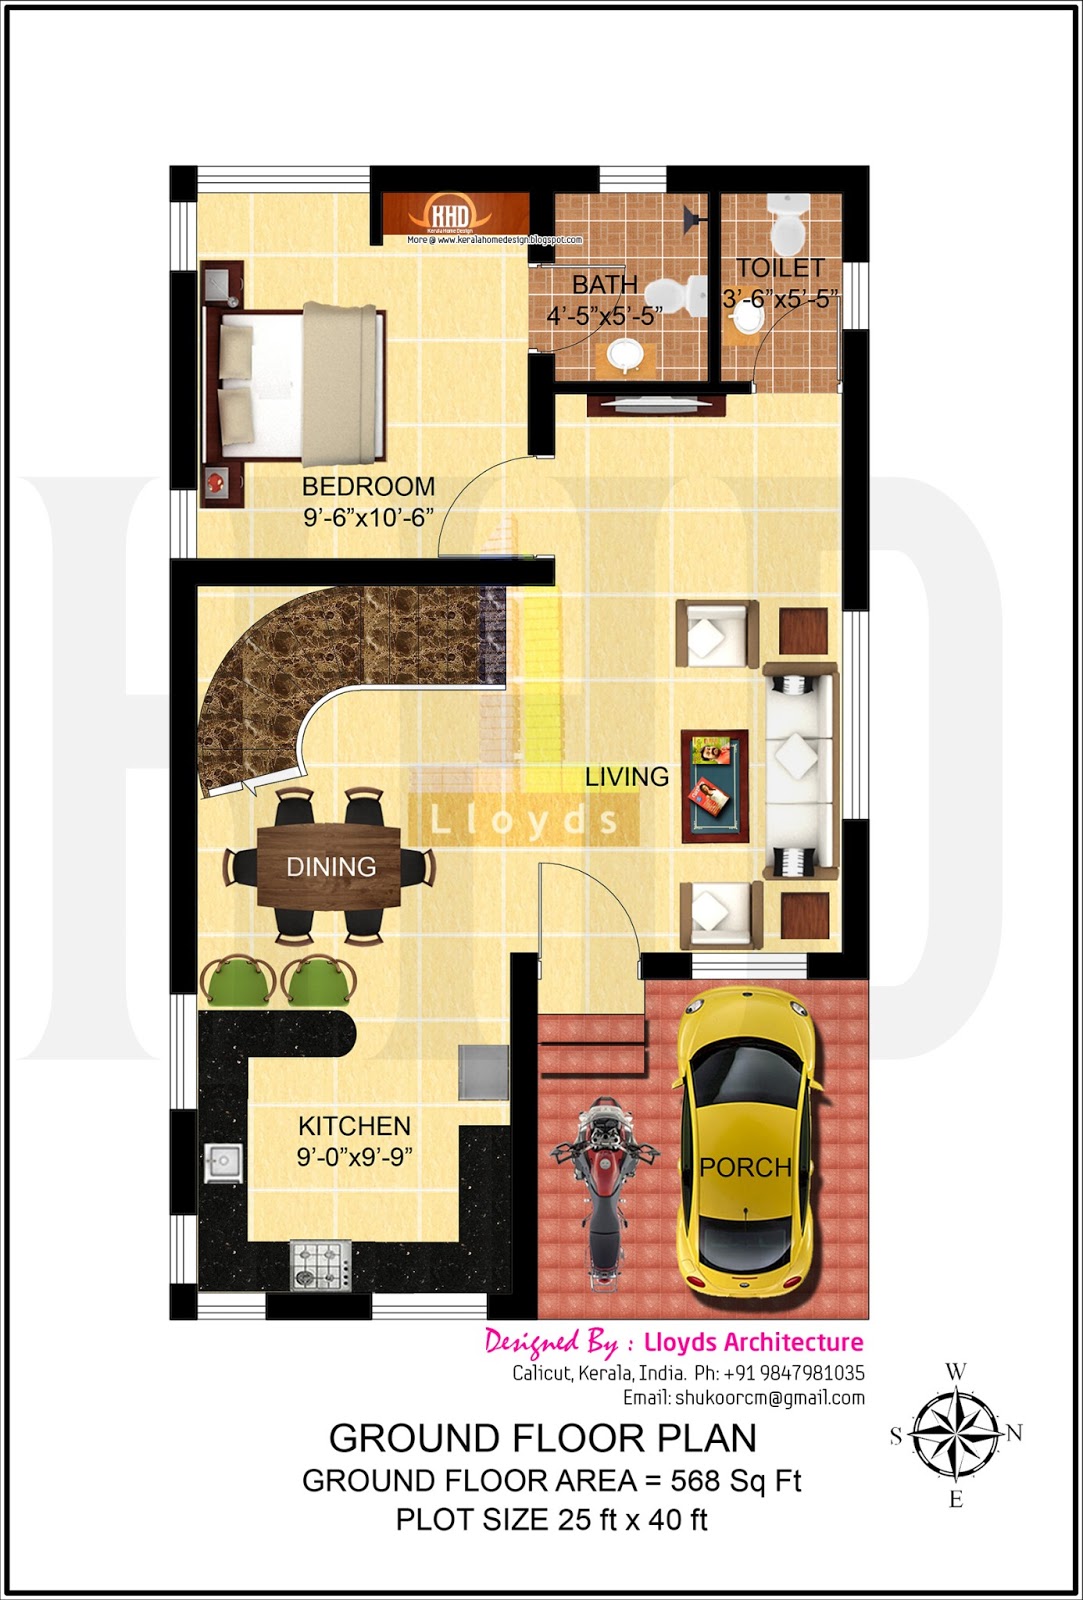 4 bedroom house  plan  in less than 3 cents  Kerala home  